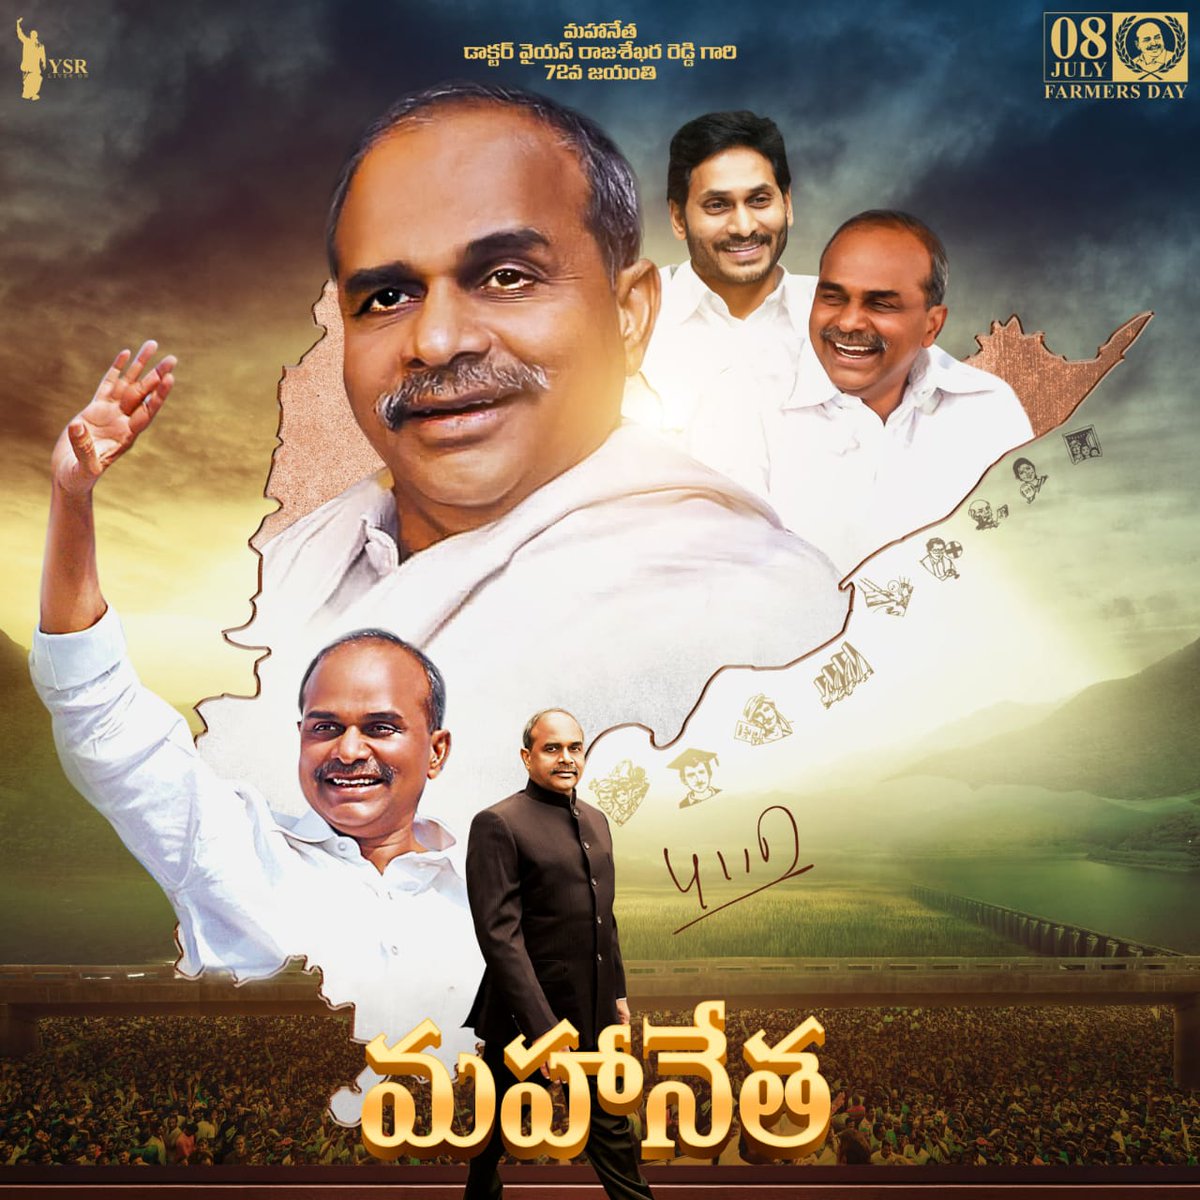 Top 999+ ysr birthday images hd – Amazing Collection ysr birthday images hd Full 4K